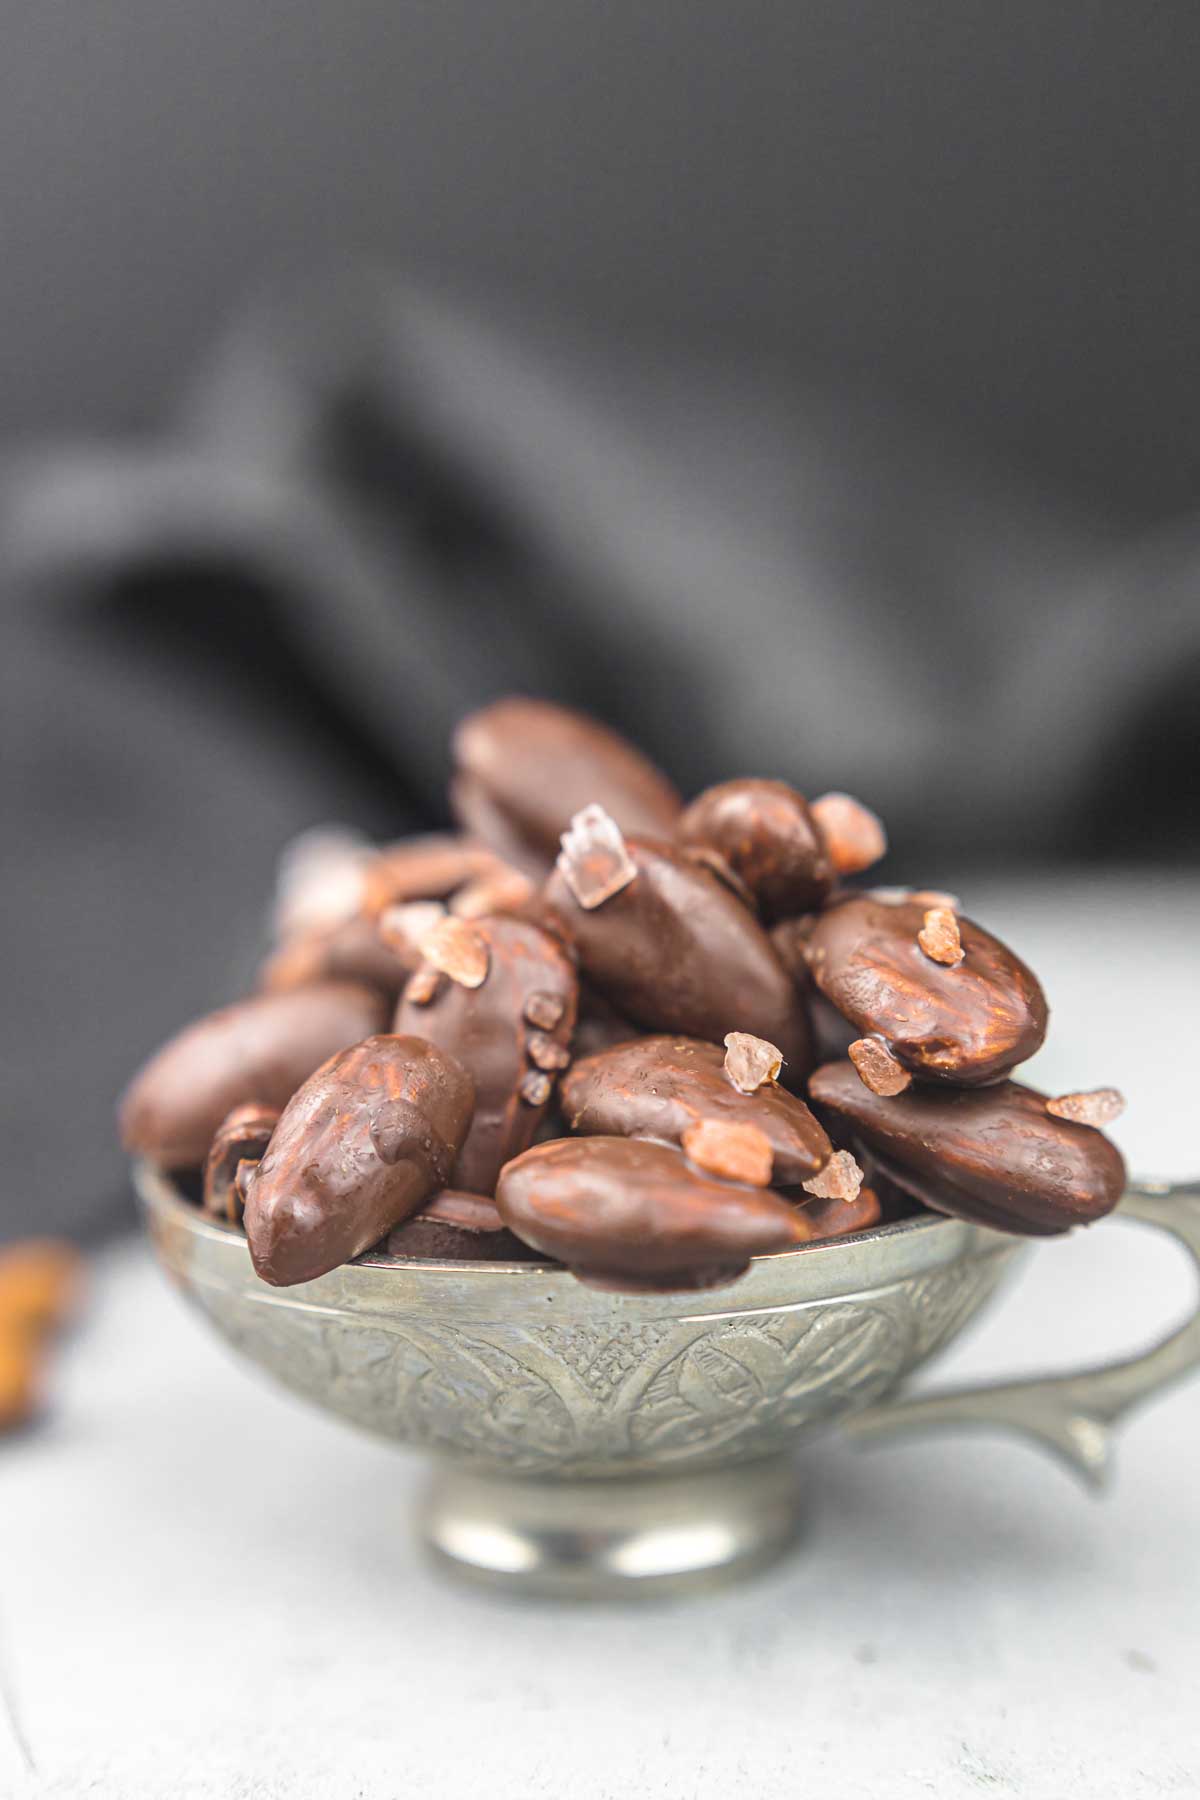 Chocolate covered almonds in a silver bowl.